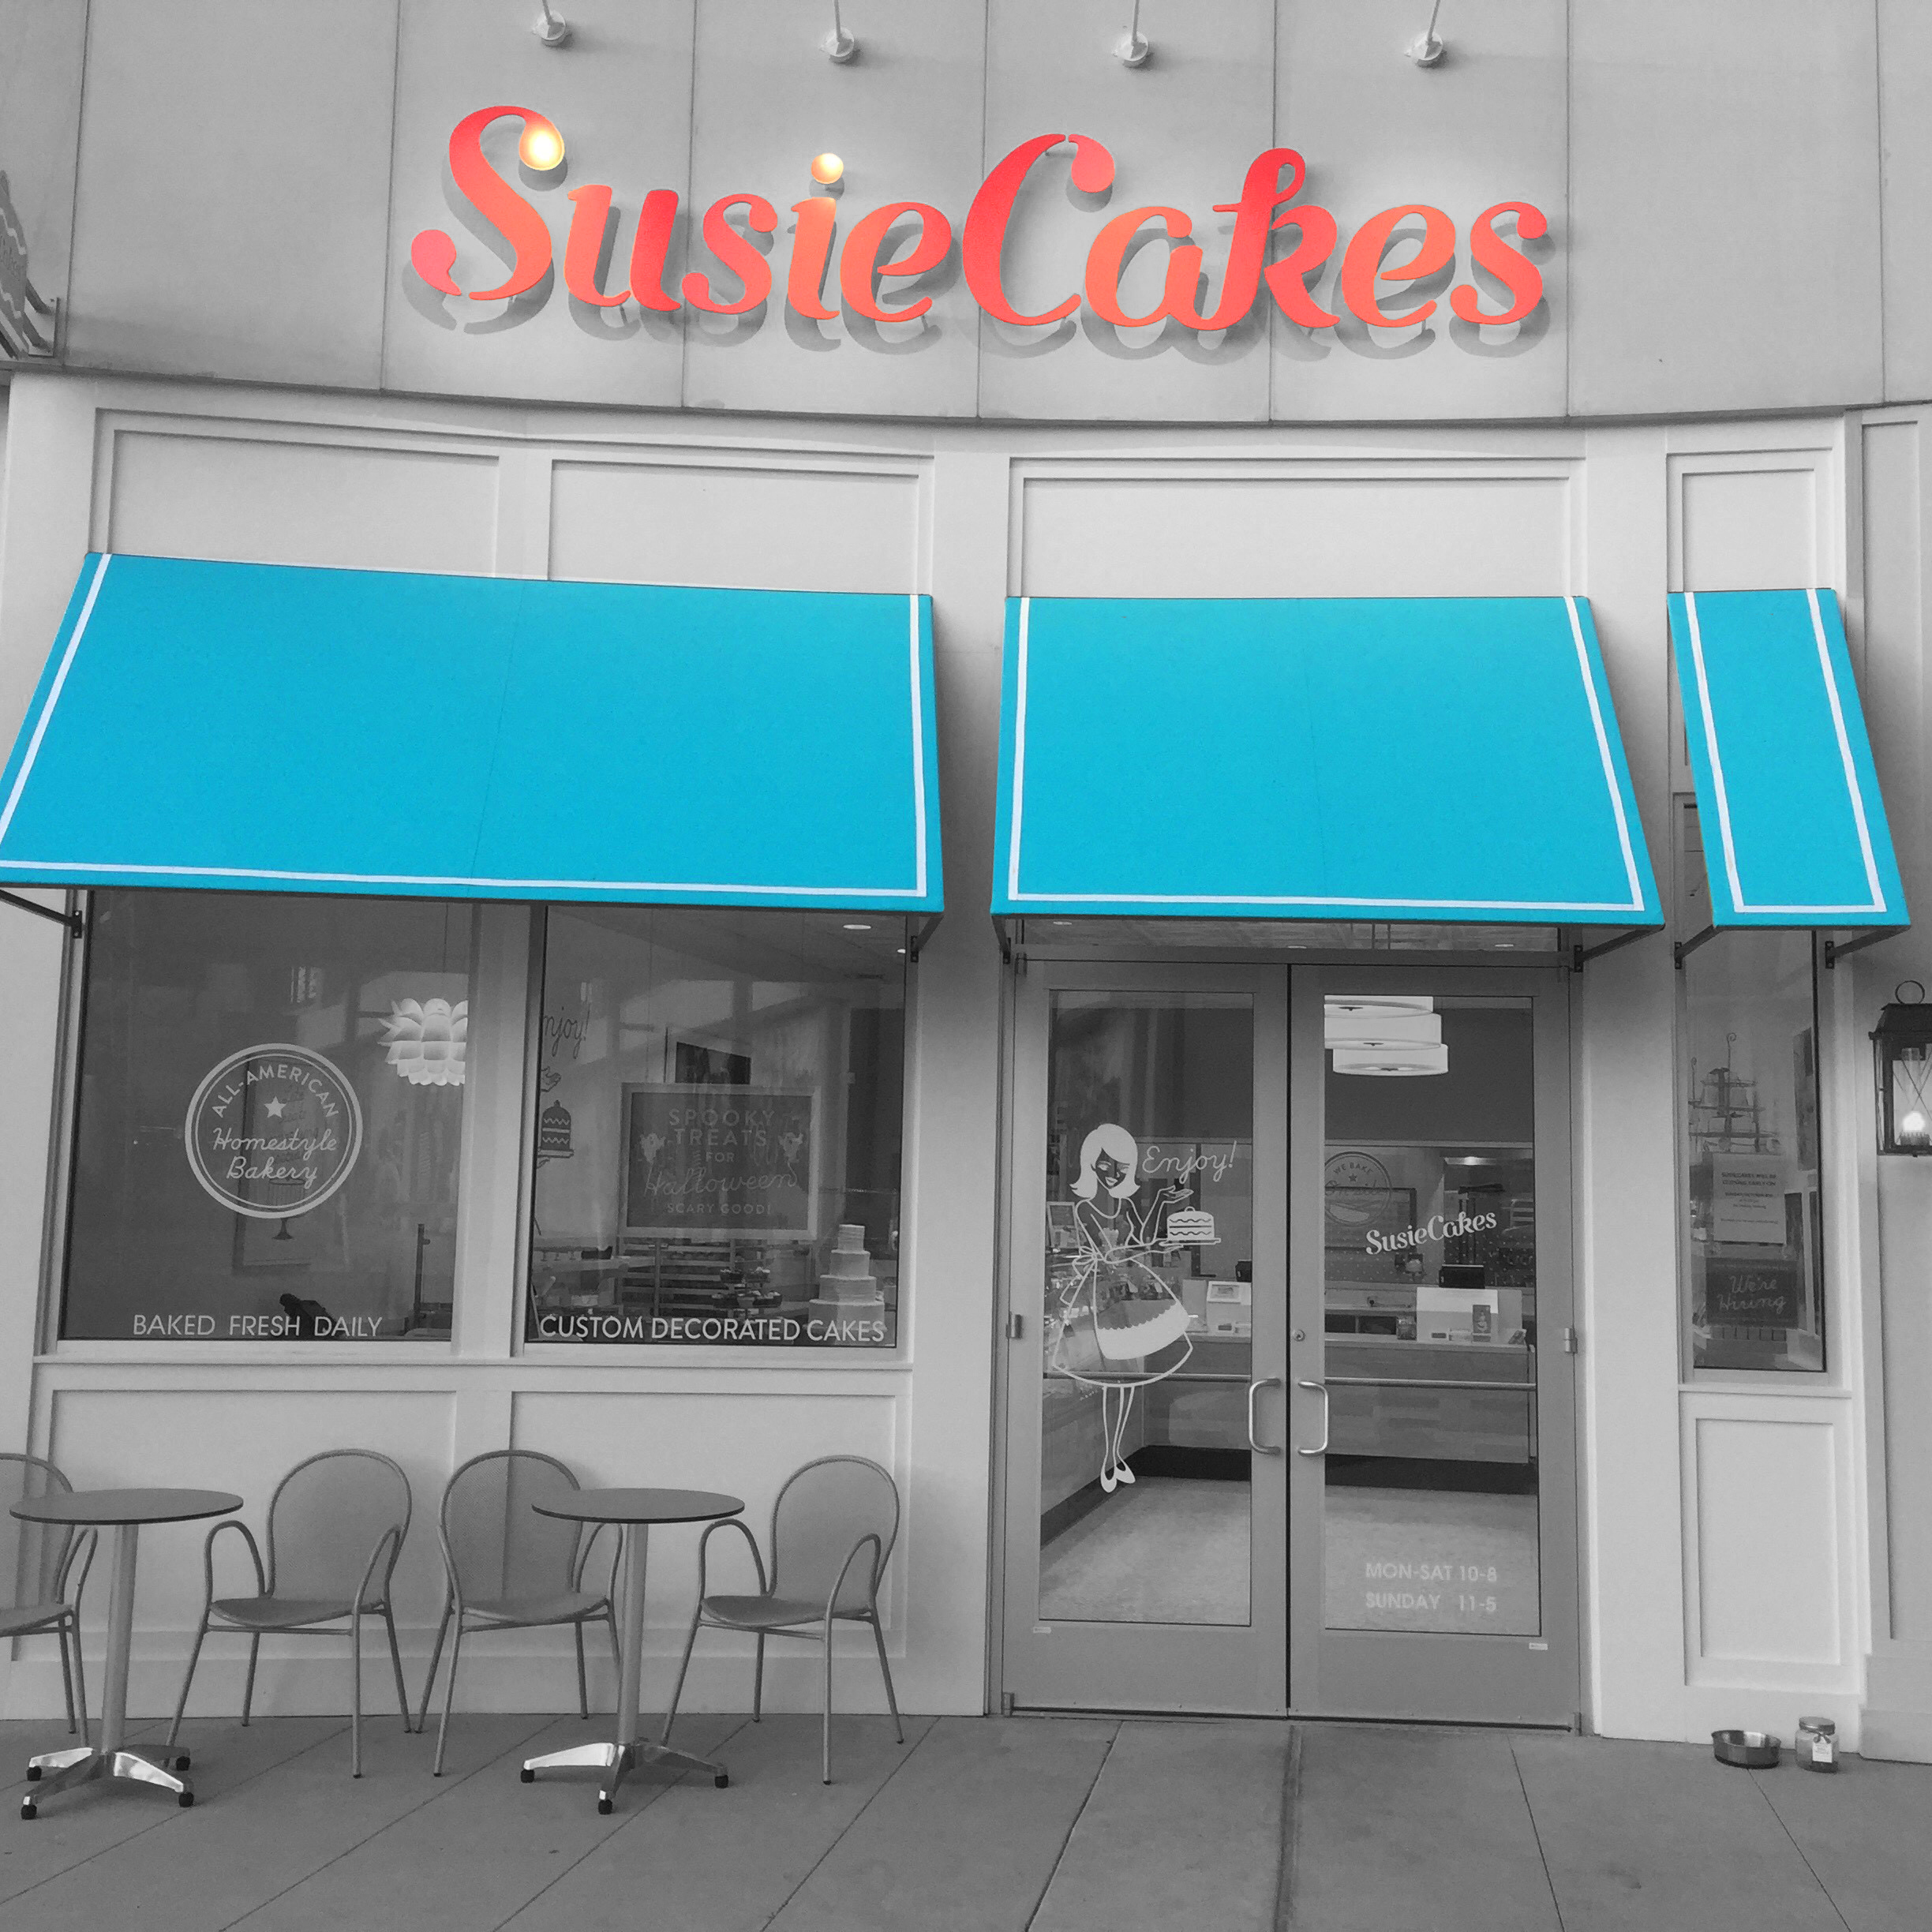 Outside of SusieCakes Bakery